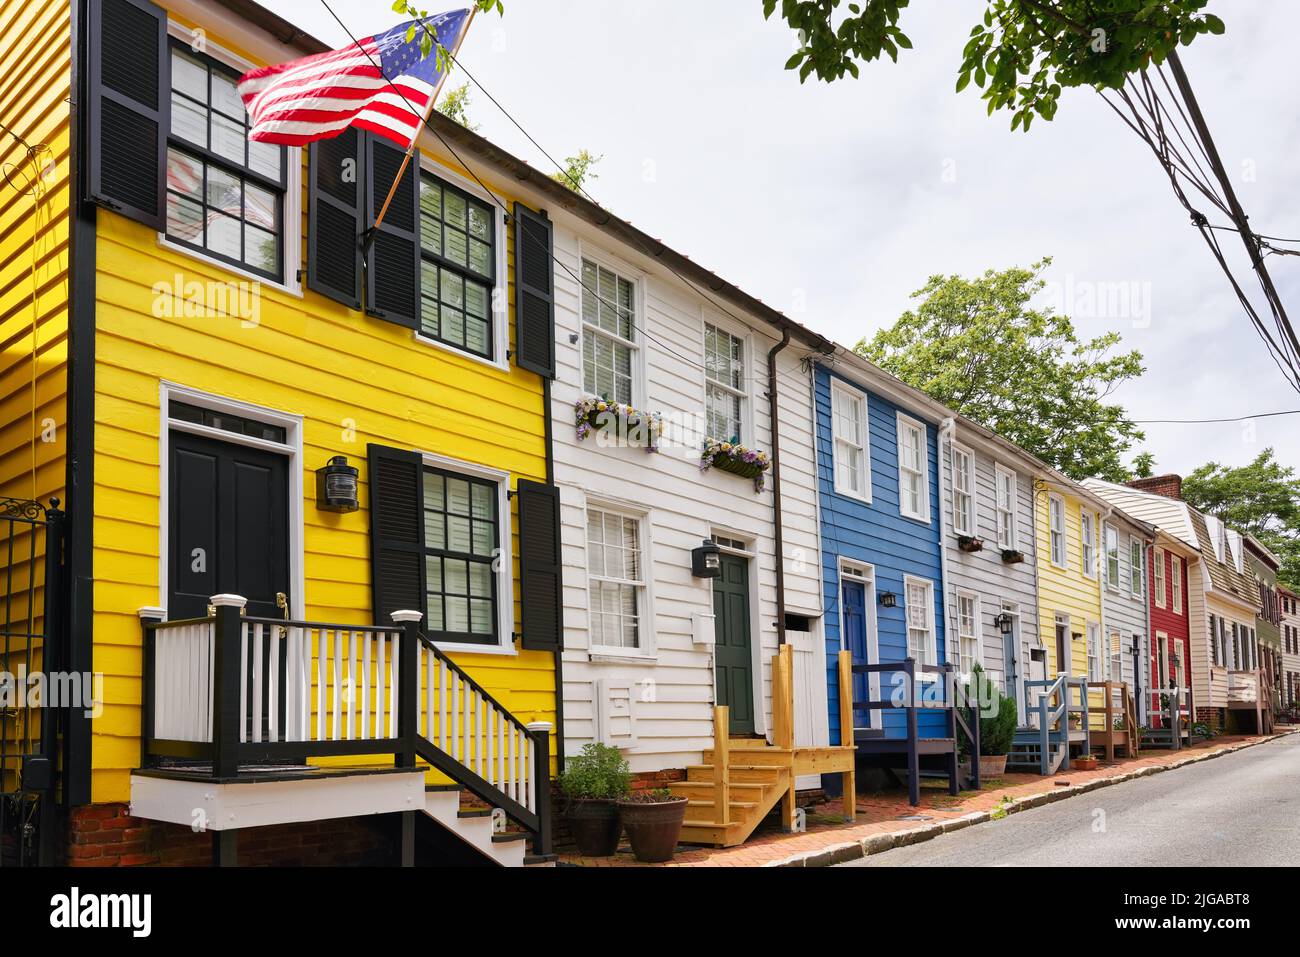 Colorful wooden townhouses in historic downtown Annapolis, Maryland, USA. Typical picturesque architecture in the capital city of Maryland. Stock Photo